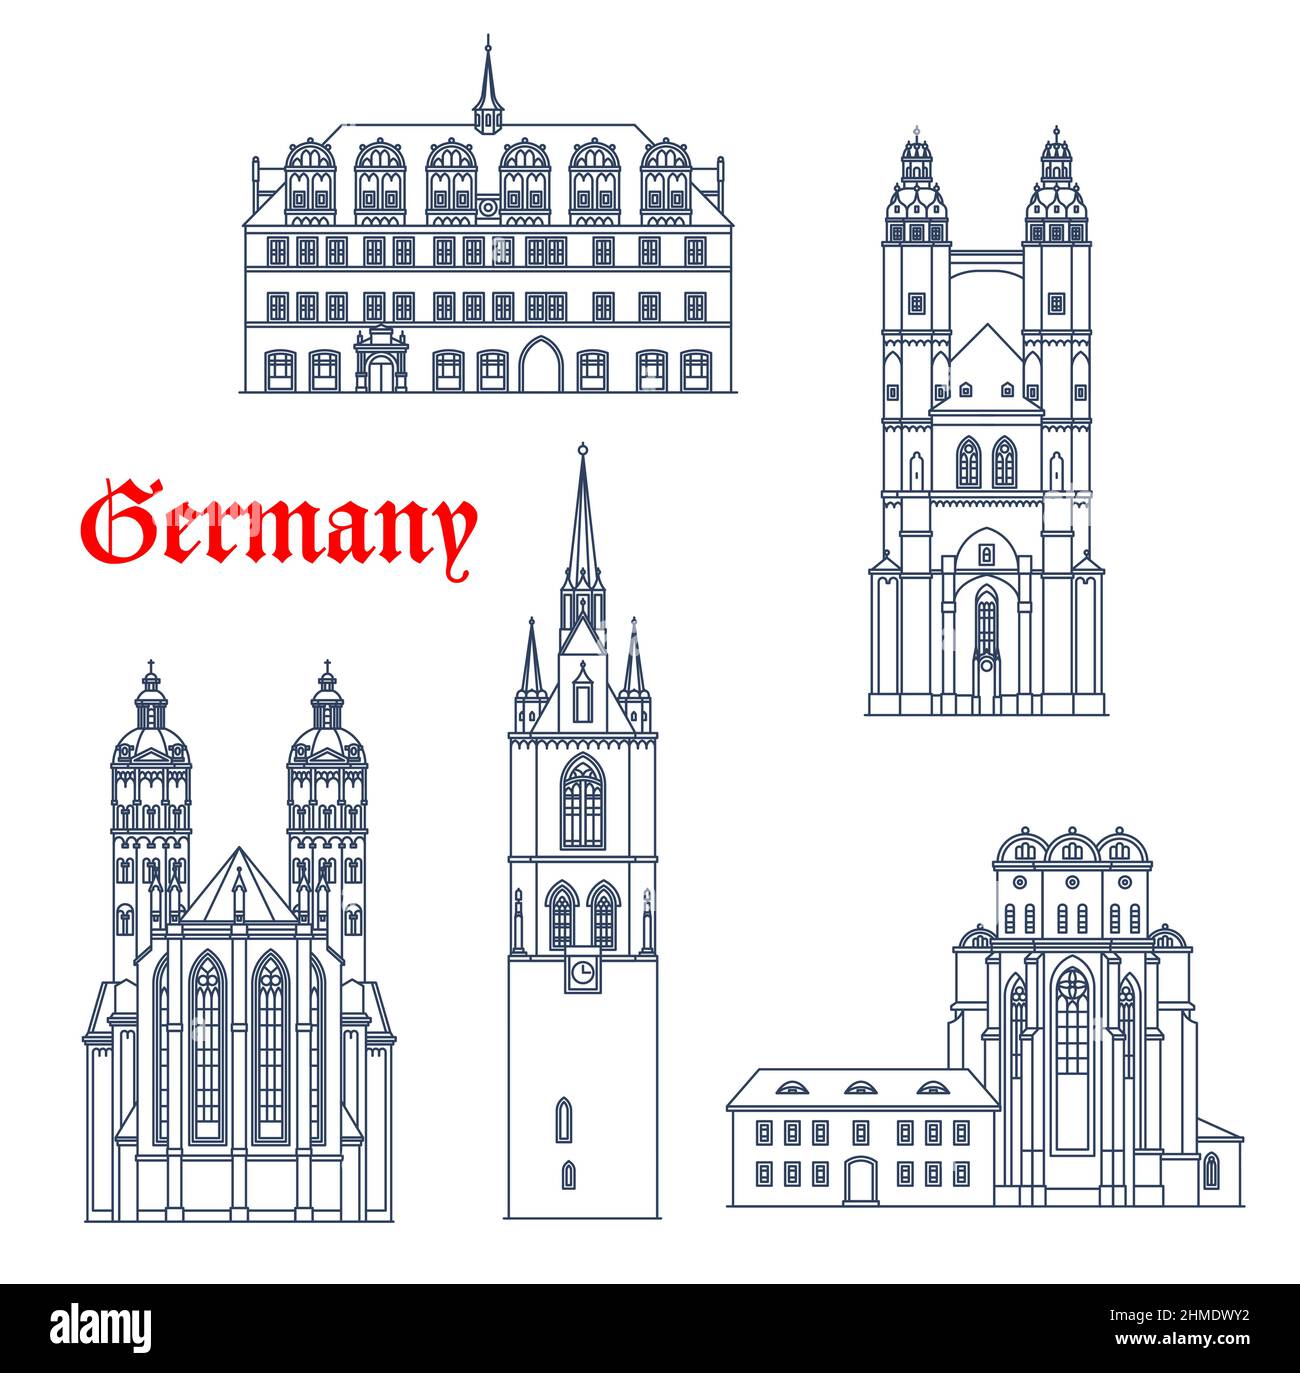 Germany architecture buildings, cathedrals and churches of Halle and Naumburg, vector. German travel landmarks Saale rathaus, Halle Dom cathedral and Stock Vector